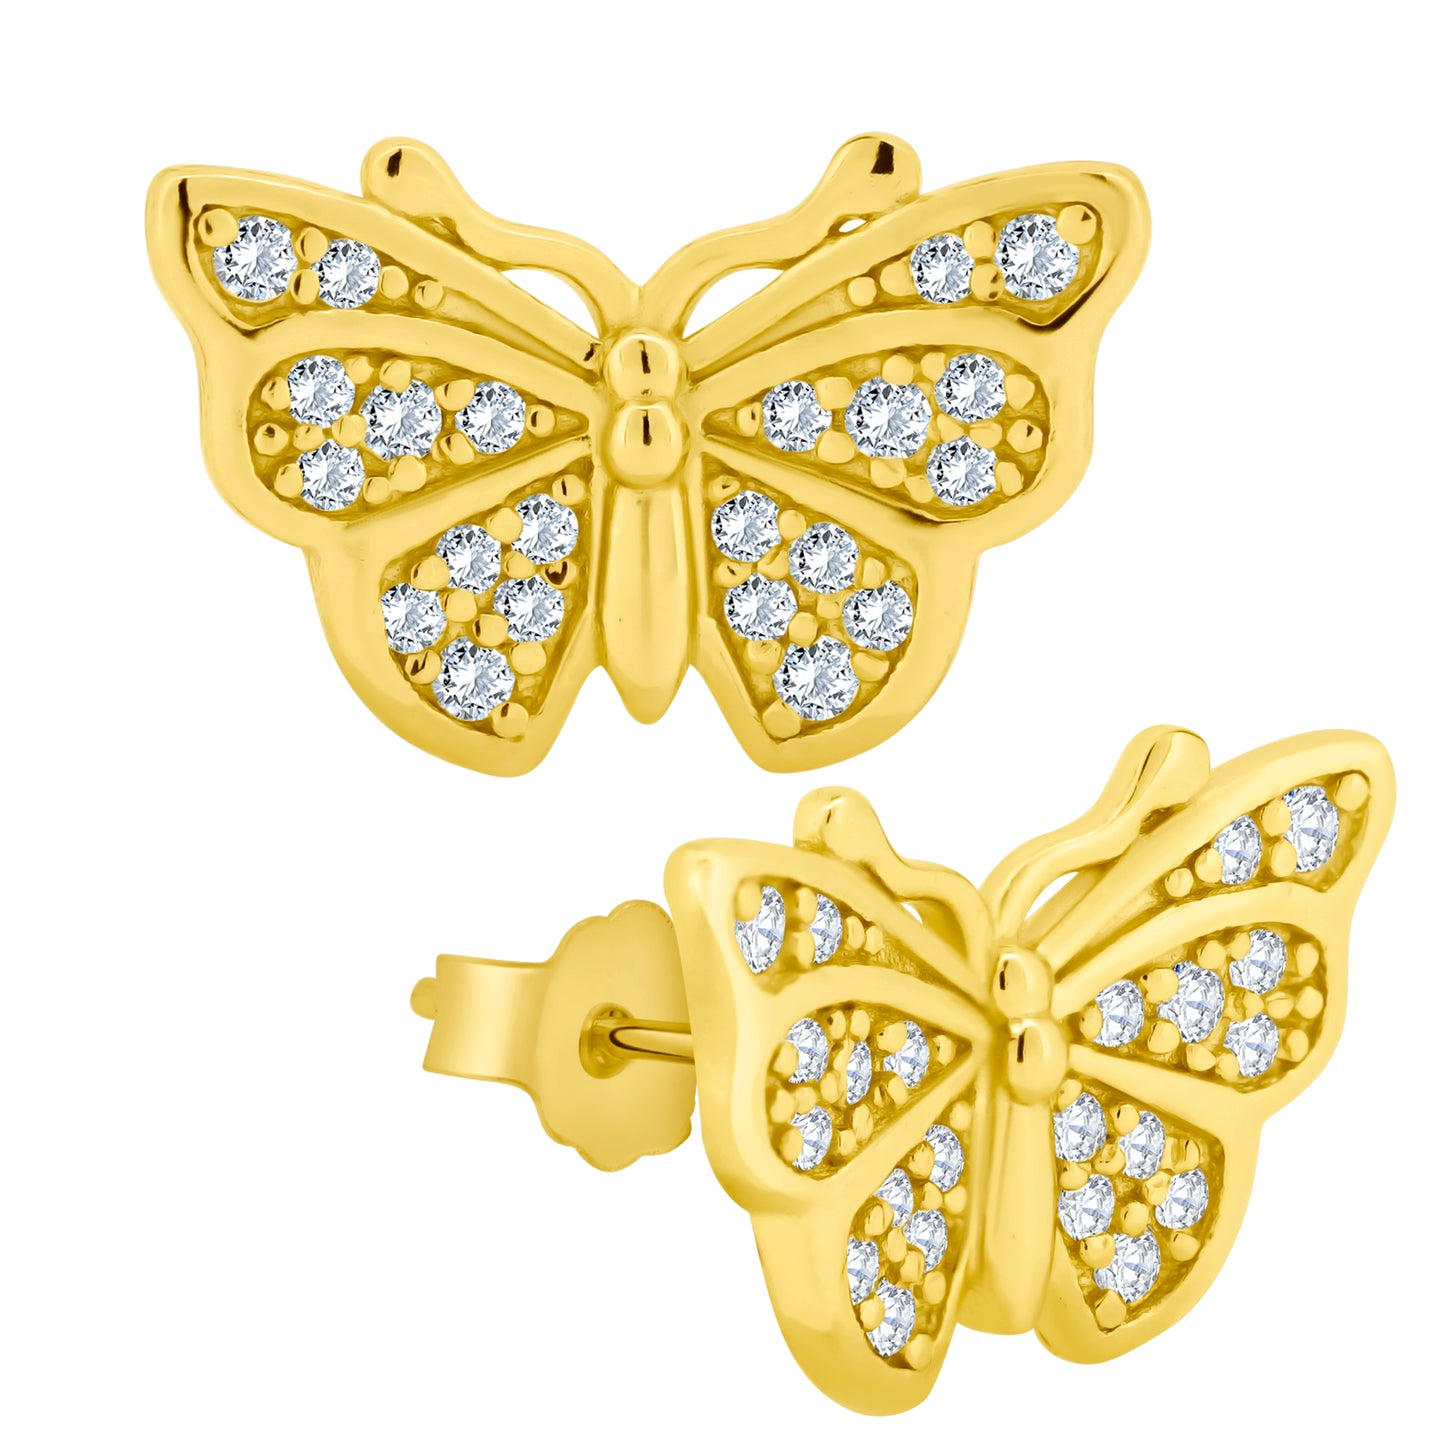 925 Sterling Silver Butterfly Design with Cubic Zirconia Earring Push Backing